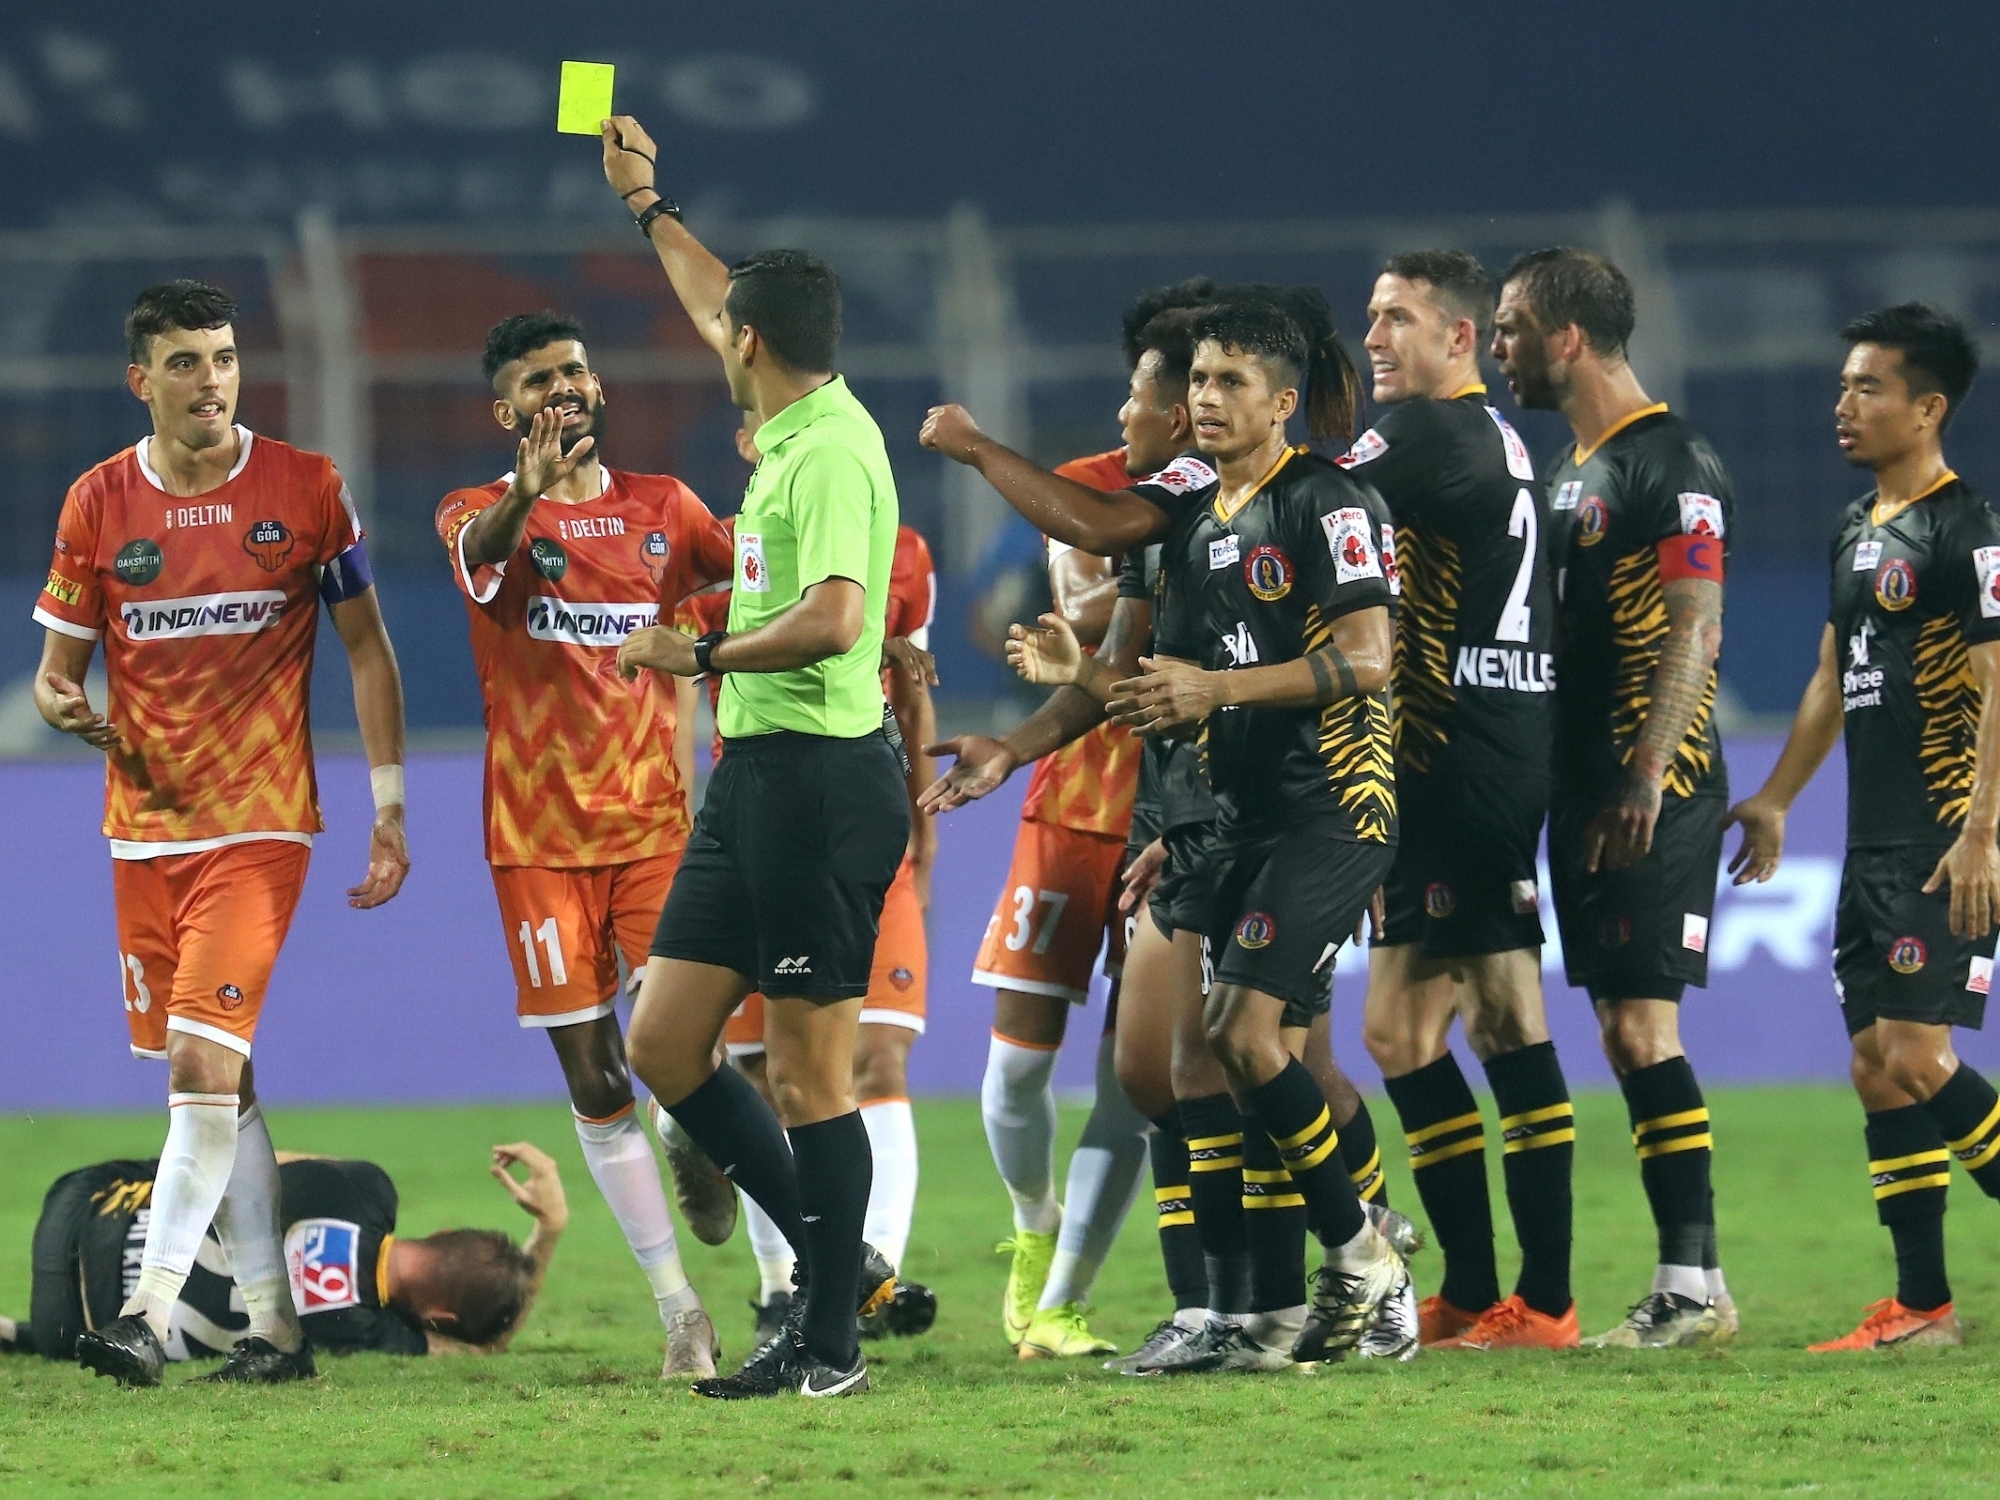 ISL 2020-21: 10-man FC Goa hold spirited fightback from SC East Bengal to play 1-1 draw